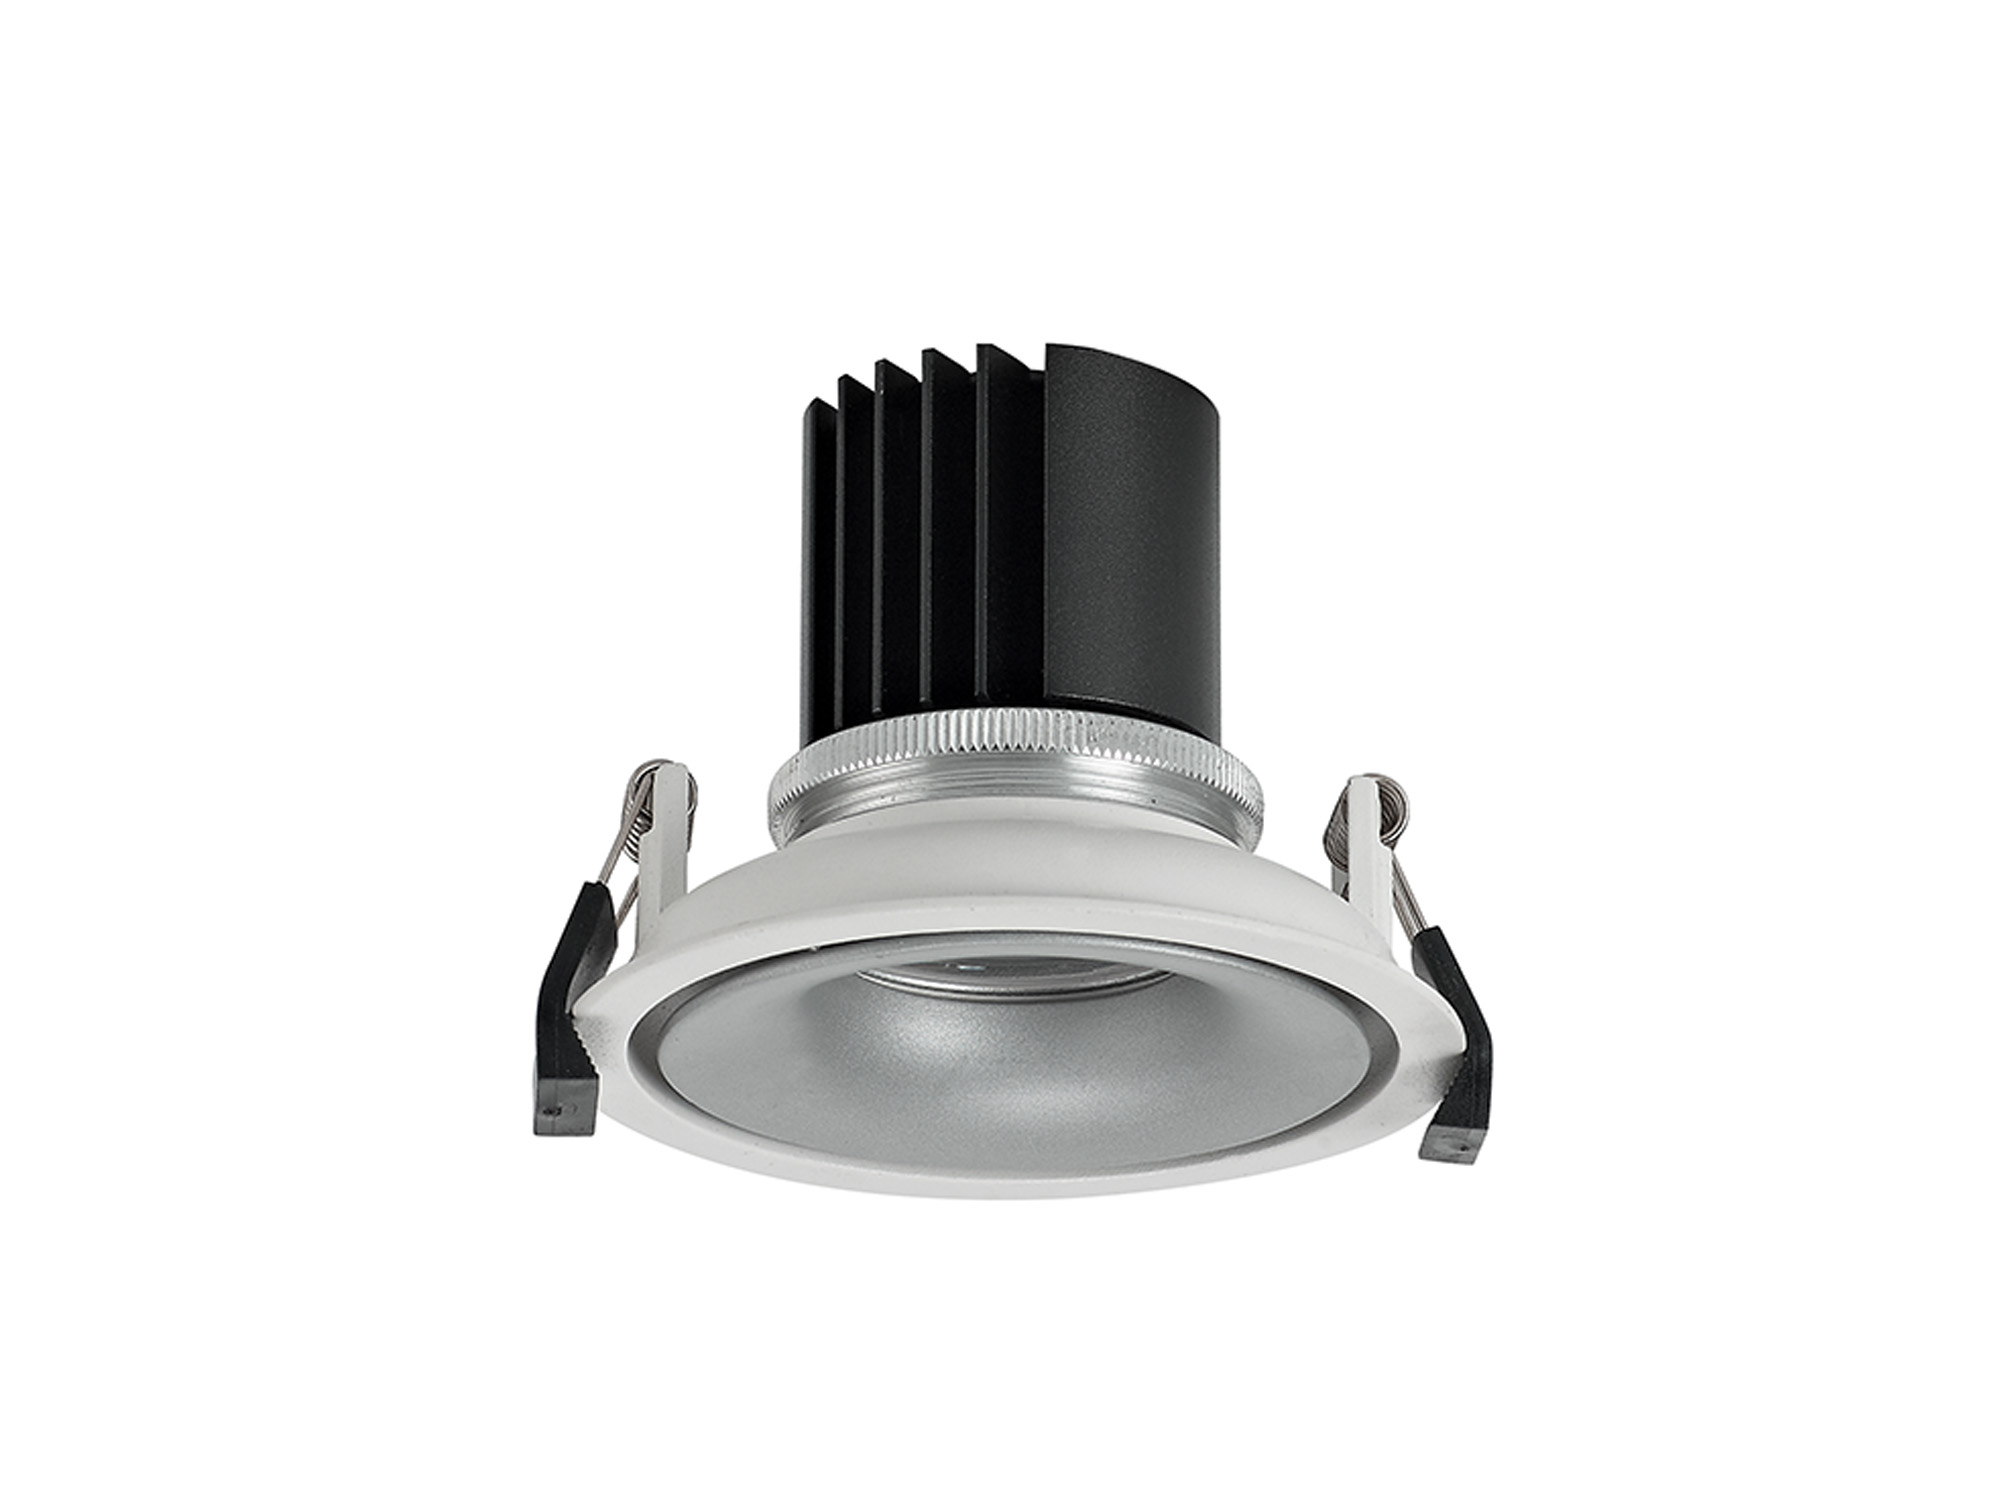 DM202036  Bolor 9 Tridonic Powered 9W 2700K 770lm 24° CRI>90 LED Engine White/Silver Fixed Recessed Spotlight, IP20